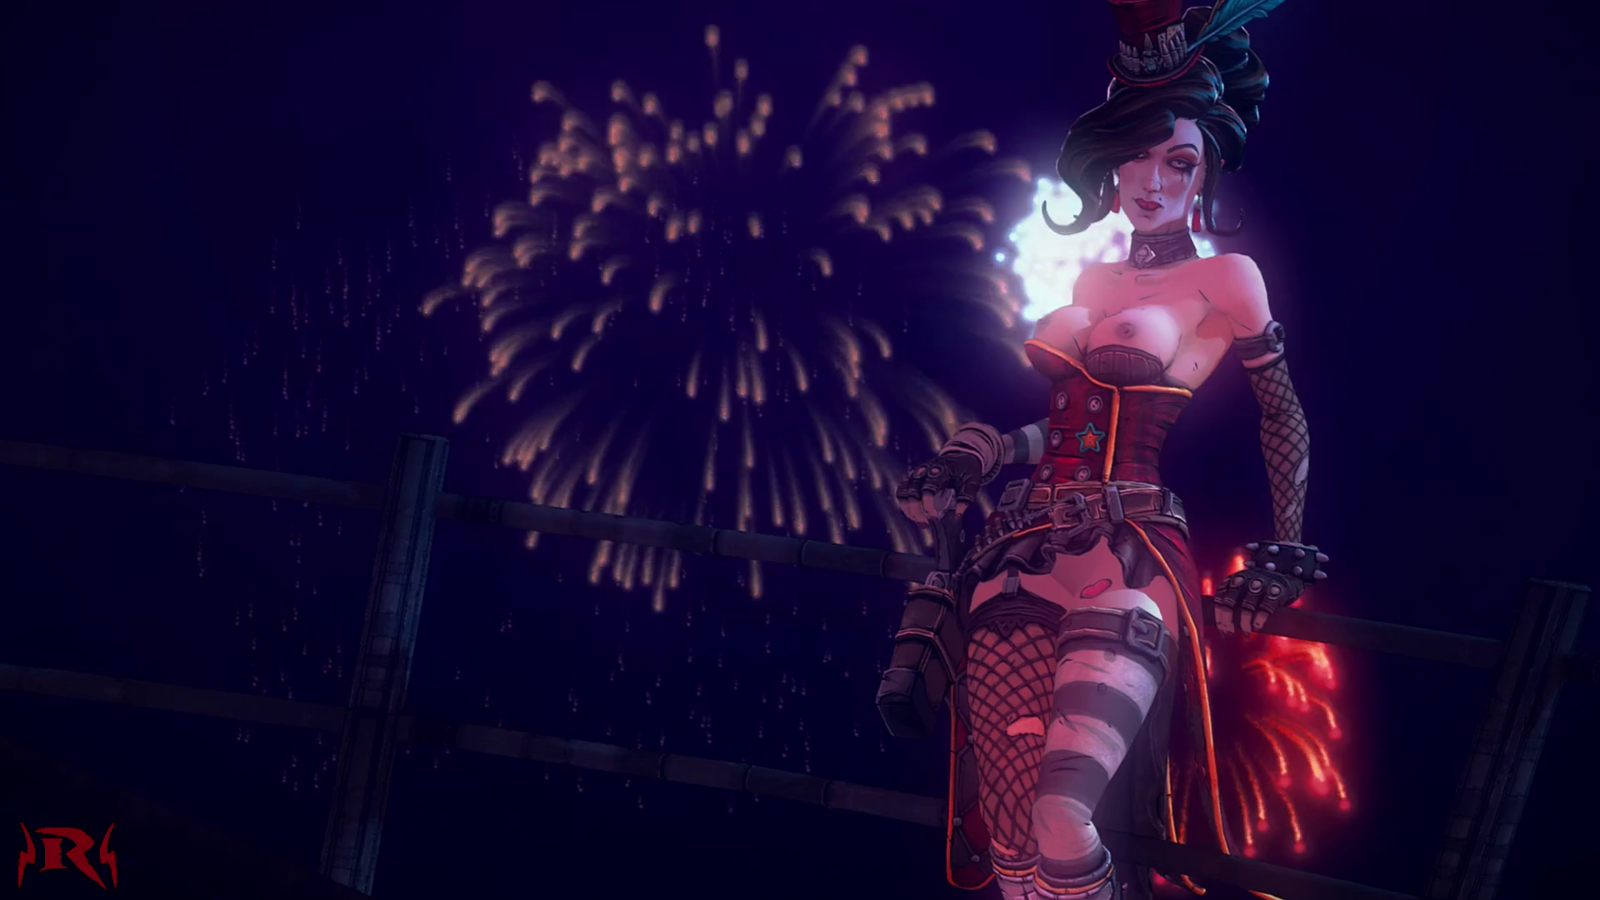 Video by Rexx with the username @rexxworld, who is a verified user,  August 14, 2020 at 9:25 PM. The post is about the topic 3D Animation Gaming and the text says '[SOUND] (Borderlands) Happy New Year.  The image I made heading into 2020, too bad Moxxi couldn't save us.
#3D #Borderlands #Moxxi #Pinup
Like what I do? Funding links in my profile, or just send some Flame'